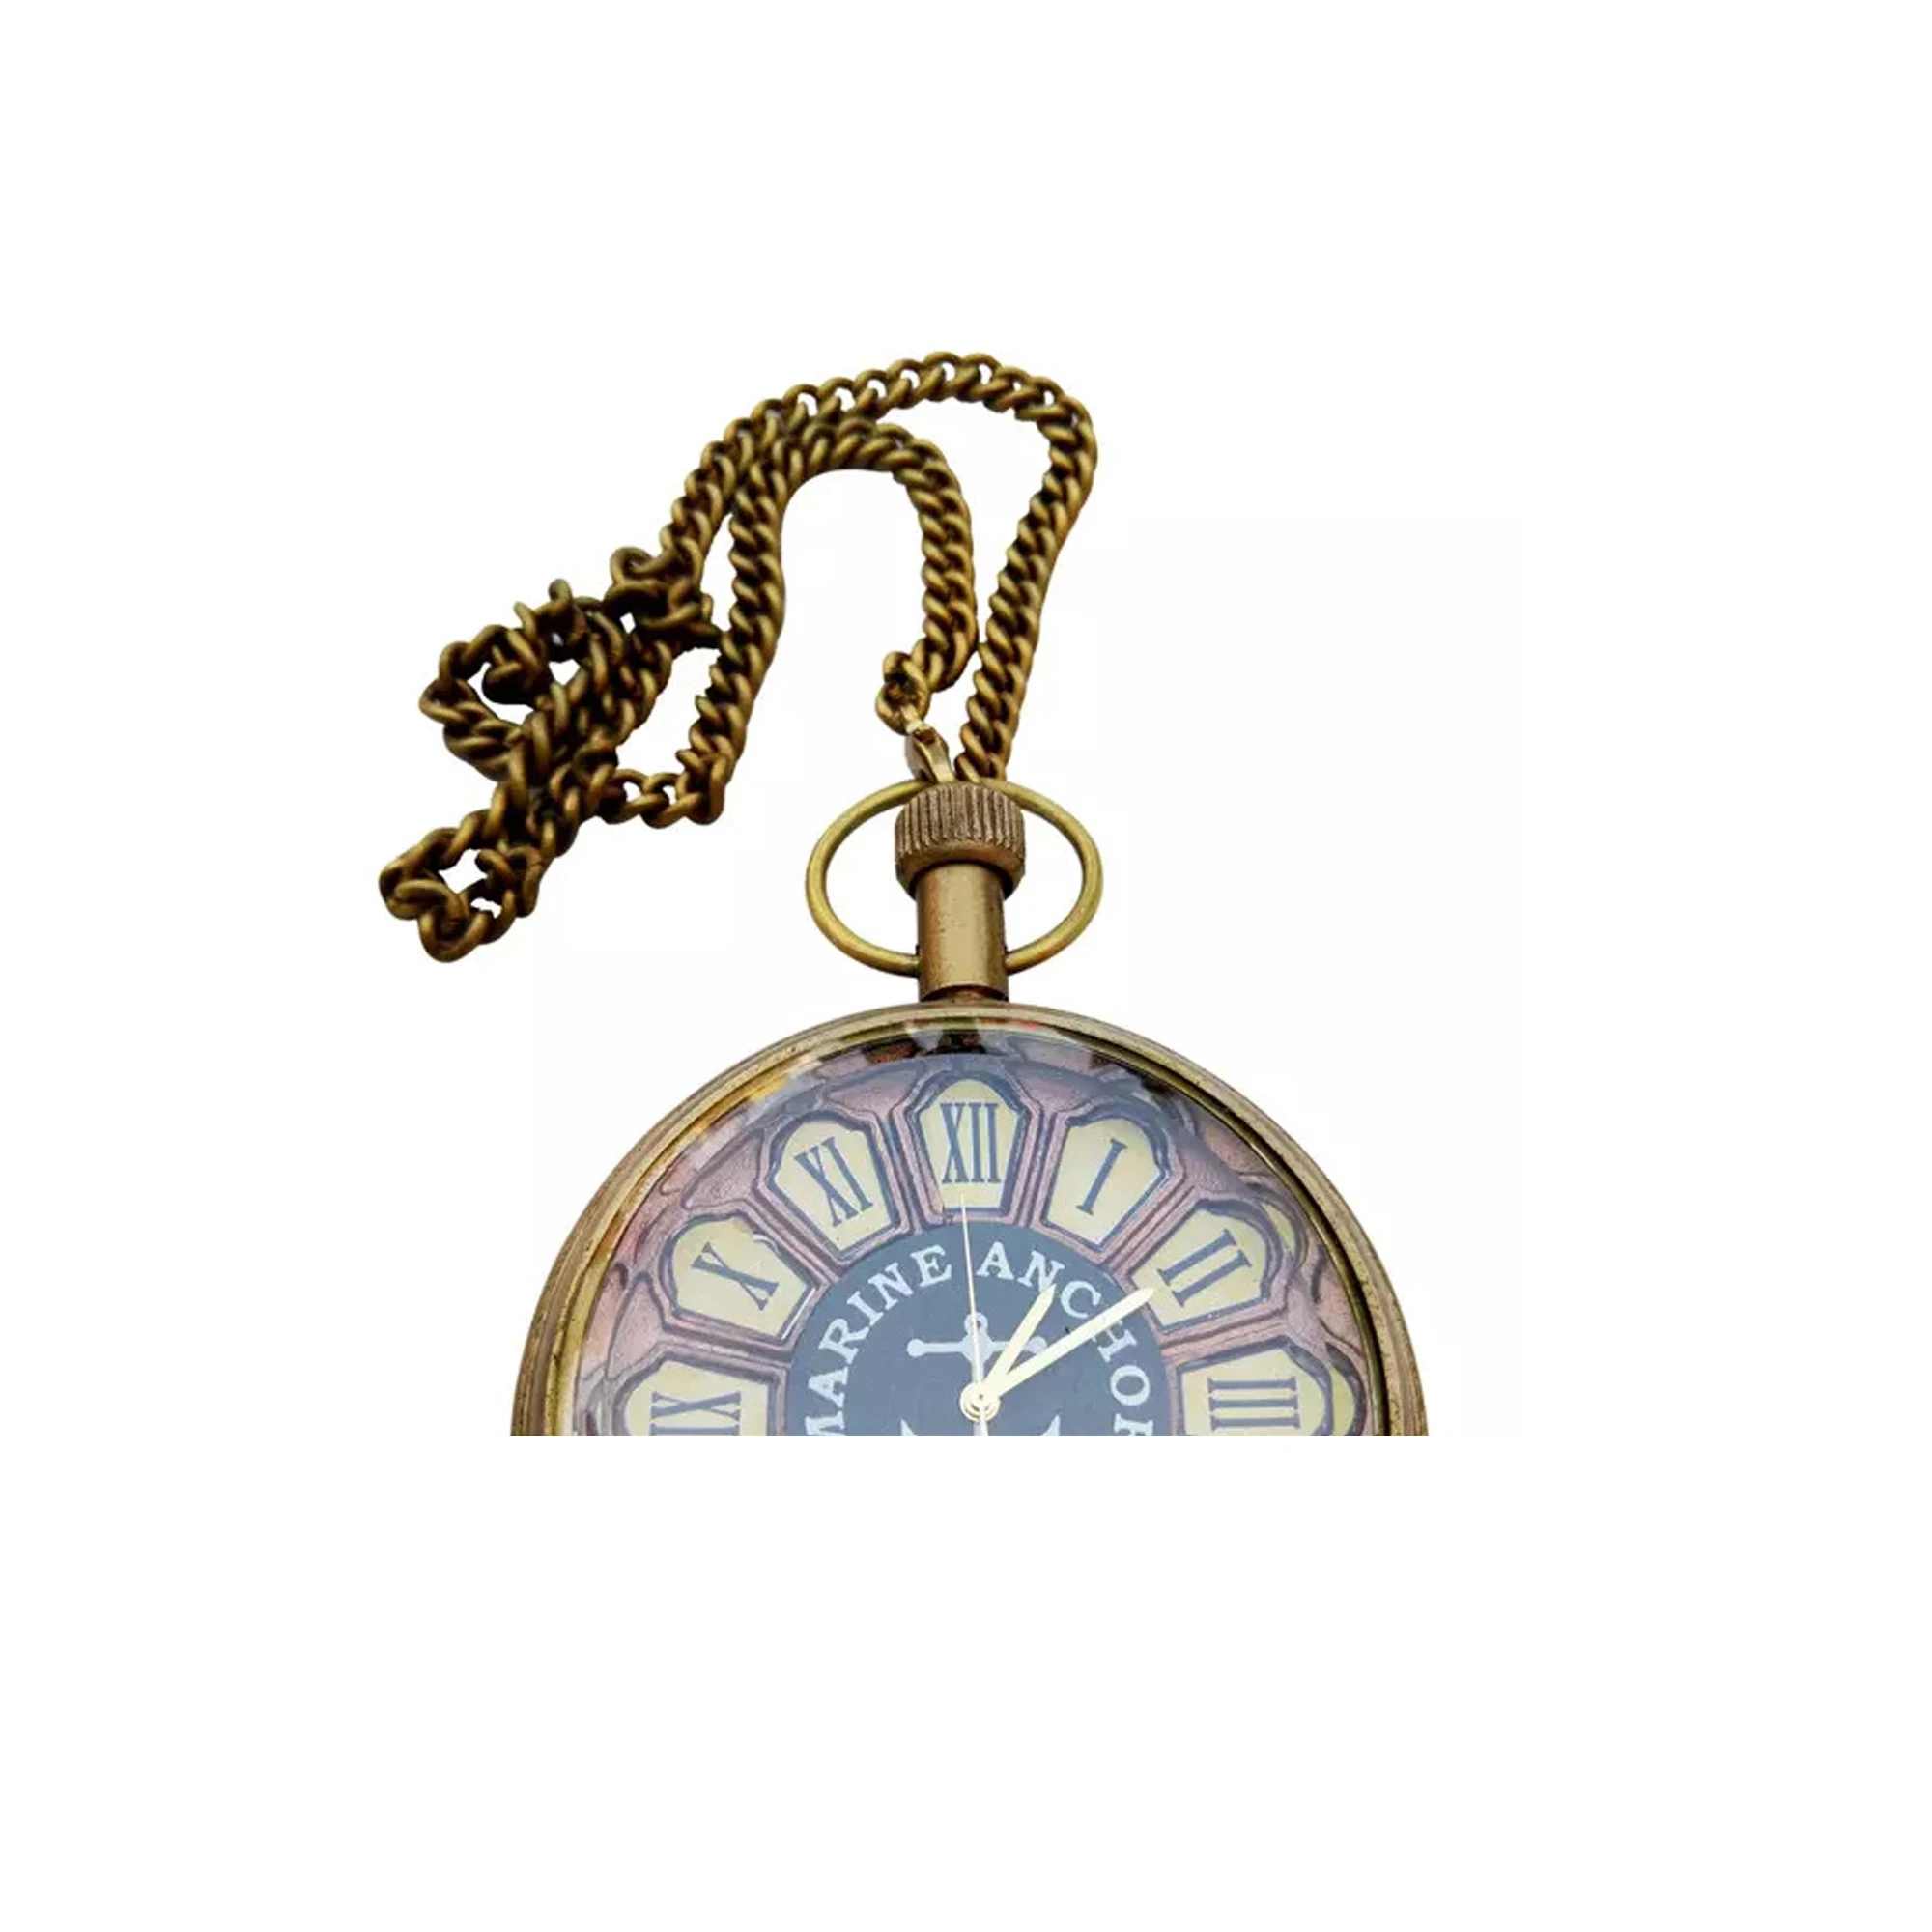 Vintage Watch Necklace Mechanical Engraved Pocket Watch with Chain Antique Maritime Anchor 1912 Pocket Watch clock